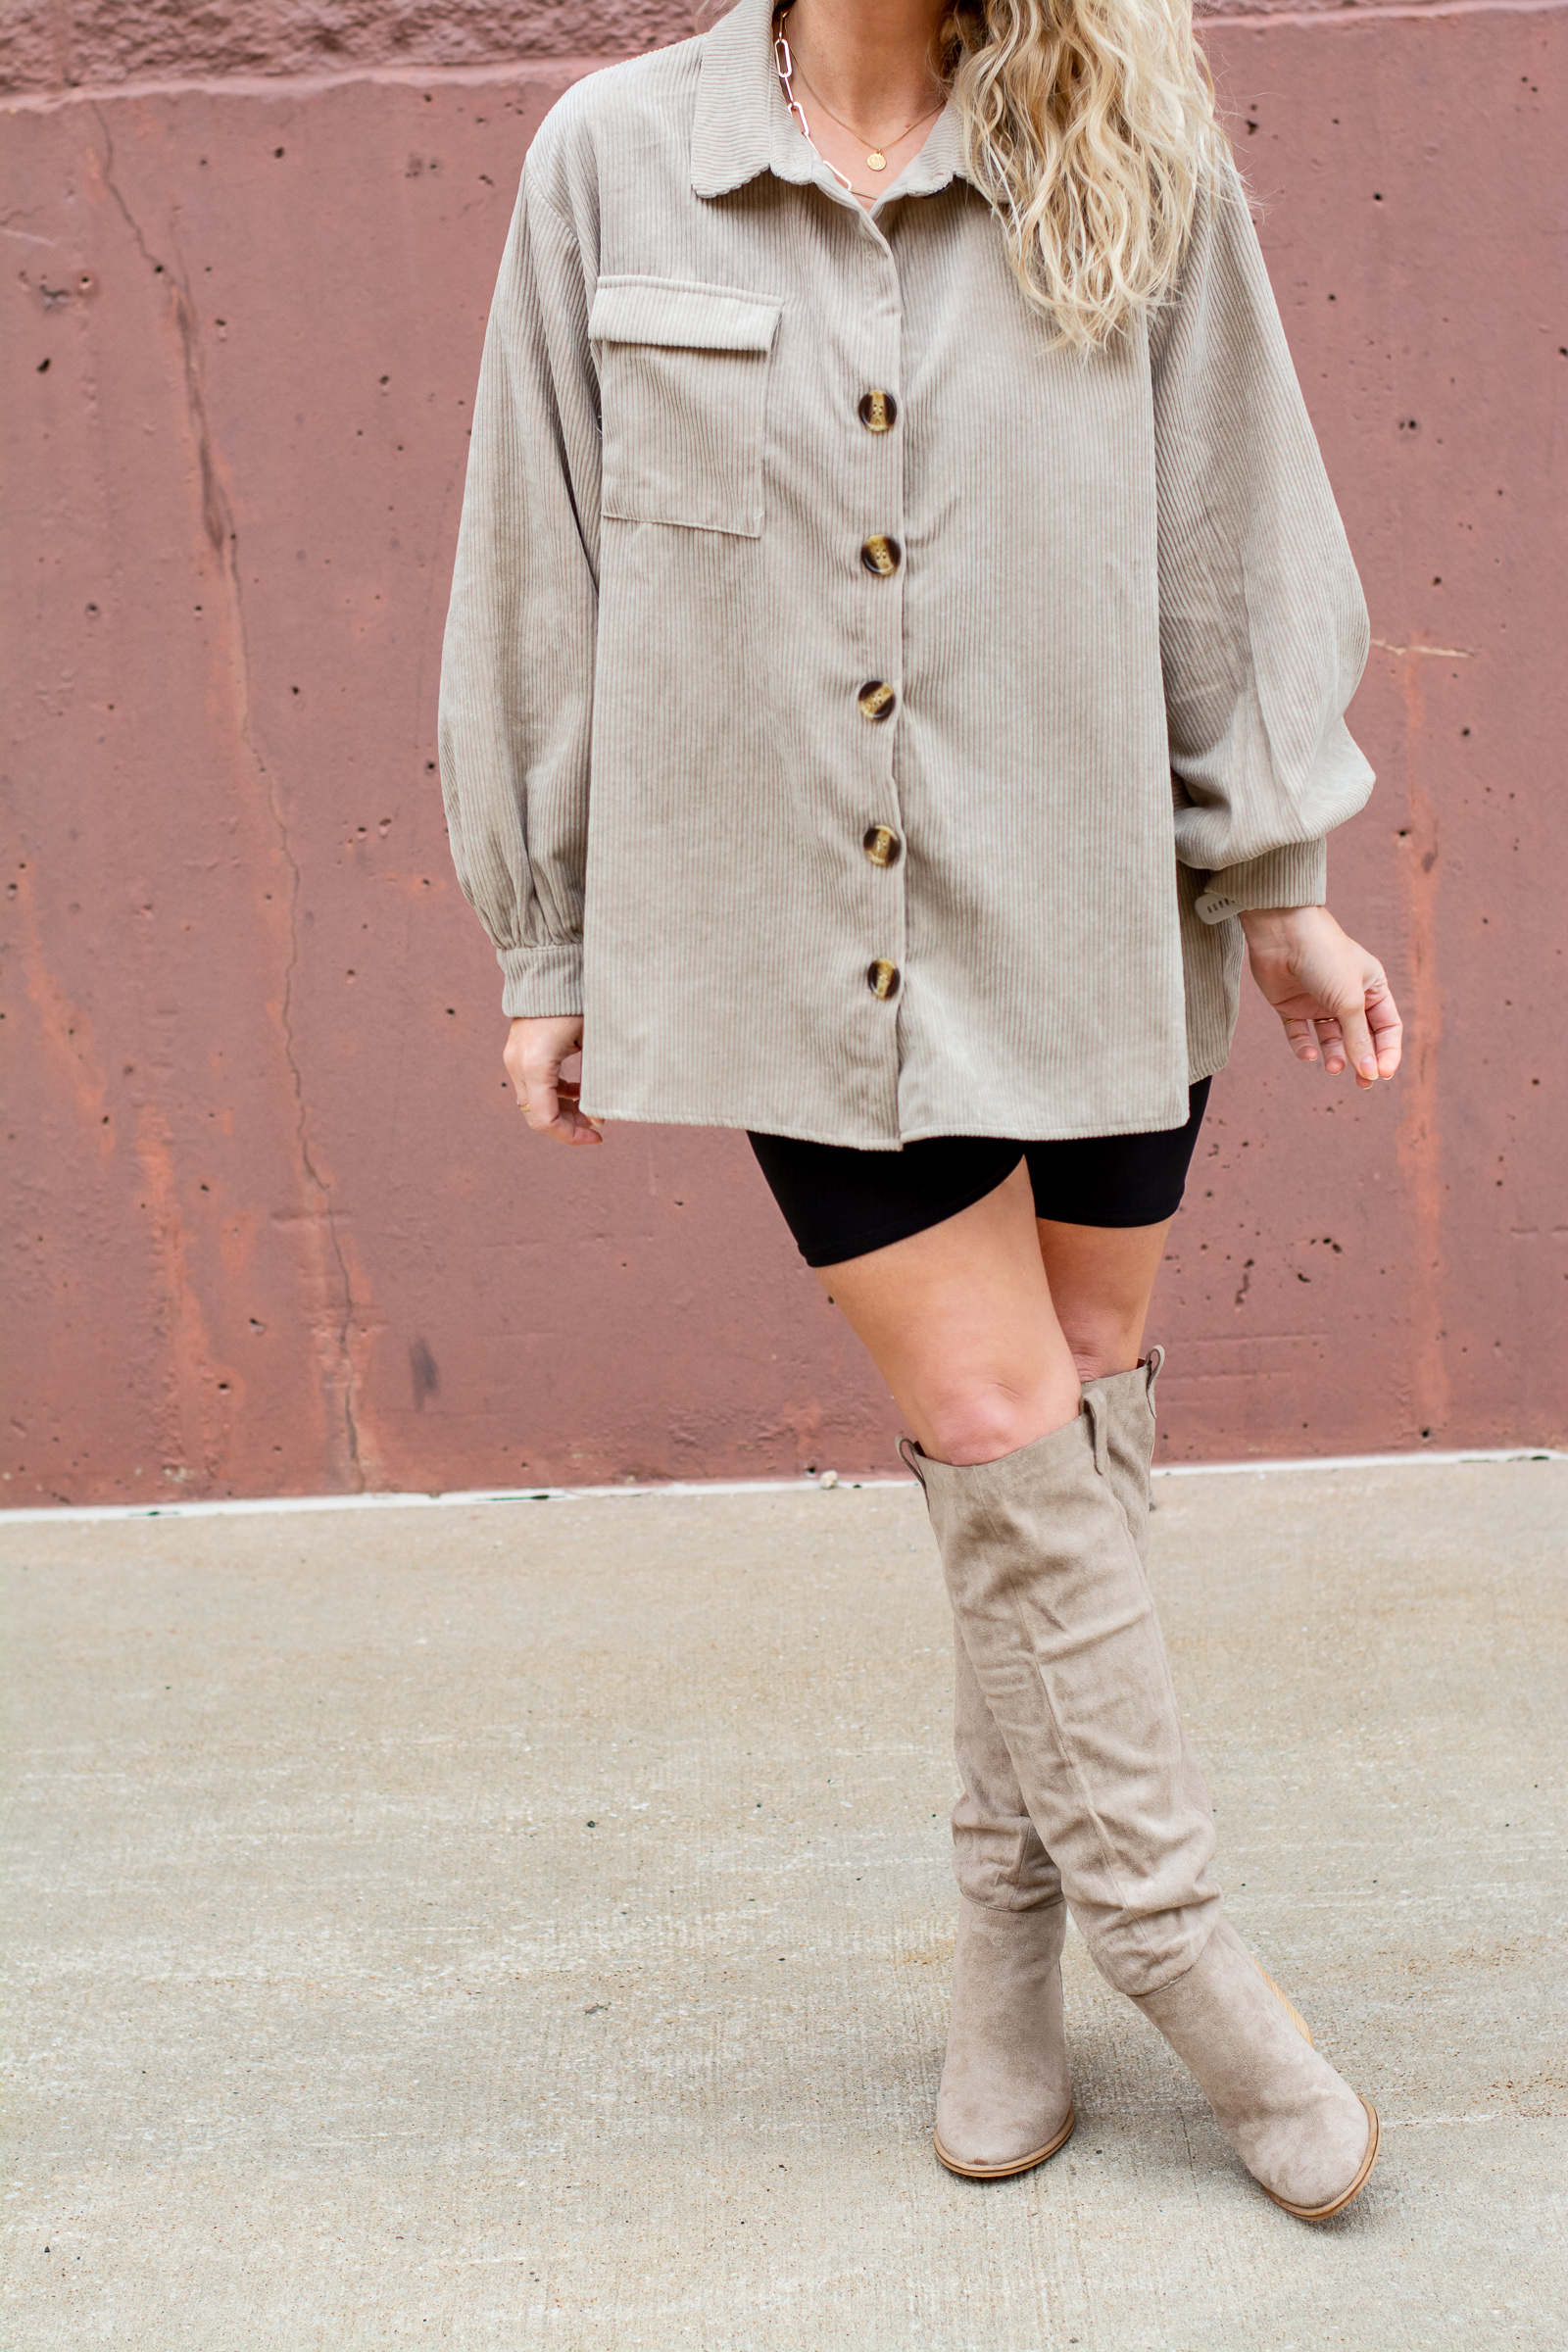 Summer to Fall Outfit: Oversized Corduroy Shirt + Tall Boots. | LSR